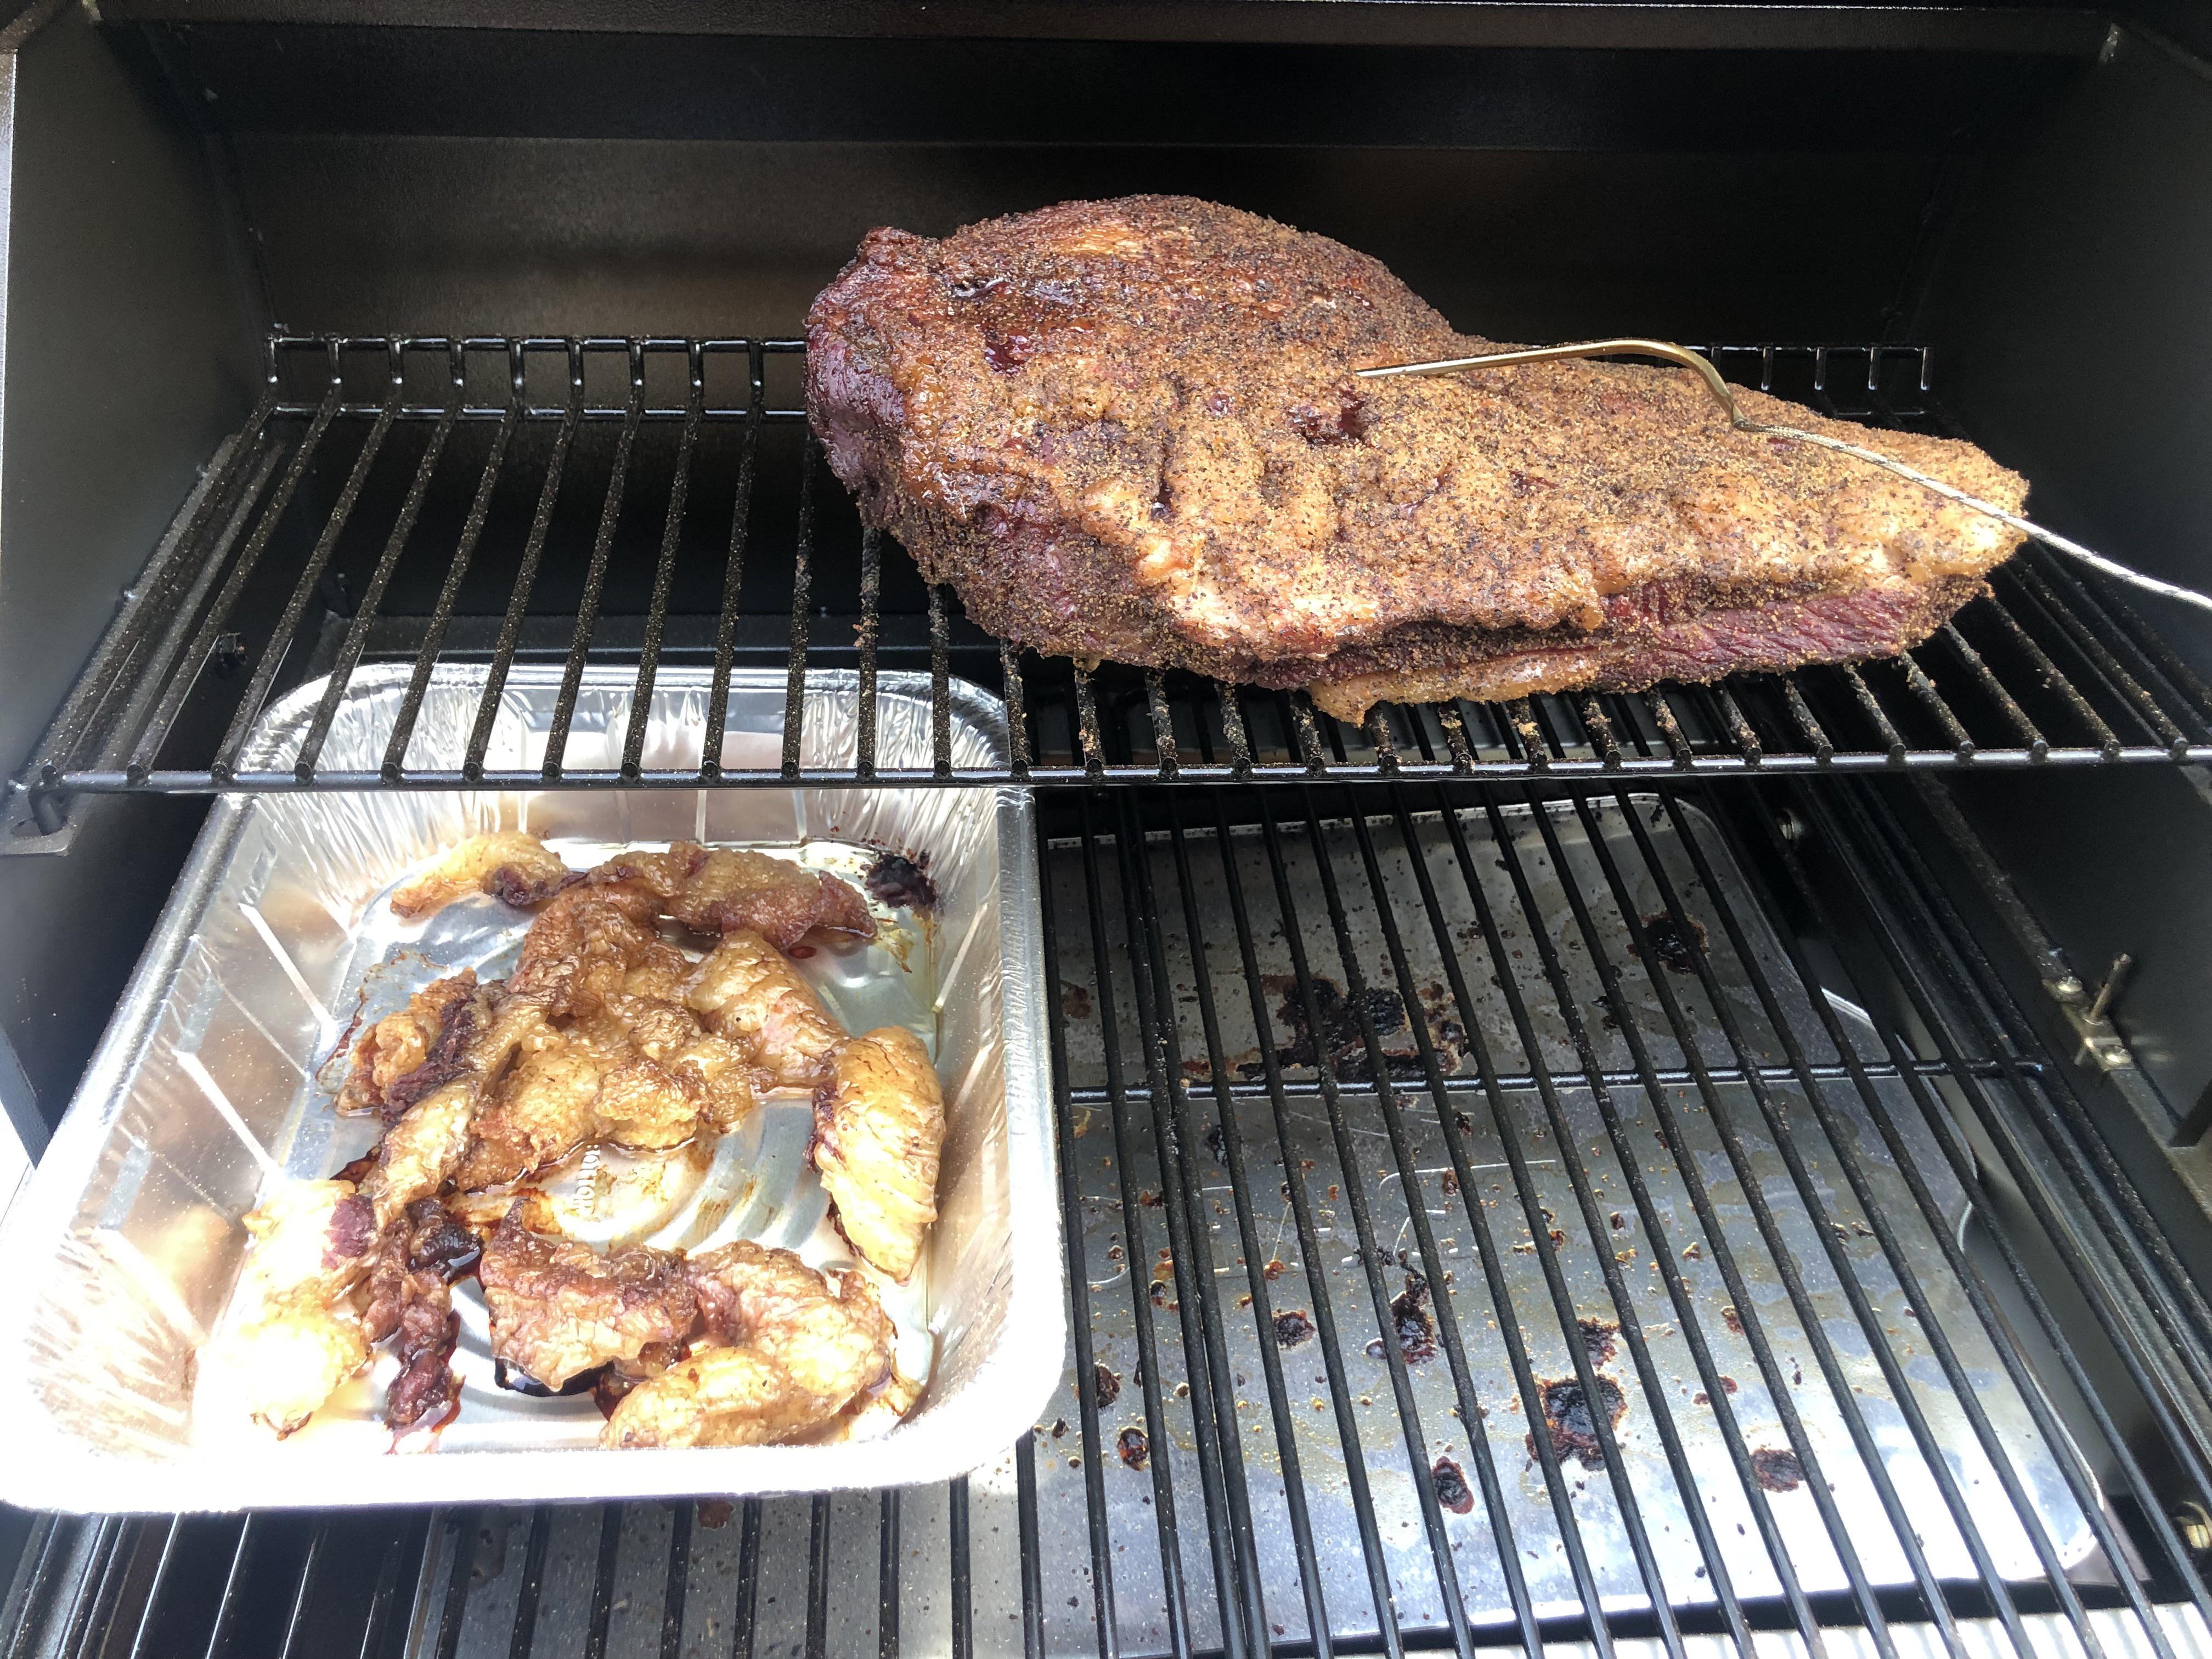 Smoke Brisket at 180 or 225: Finding Your Ideal Smoking Temperature